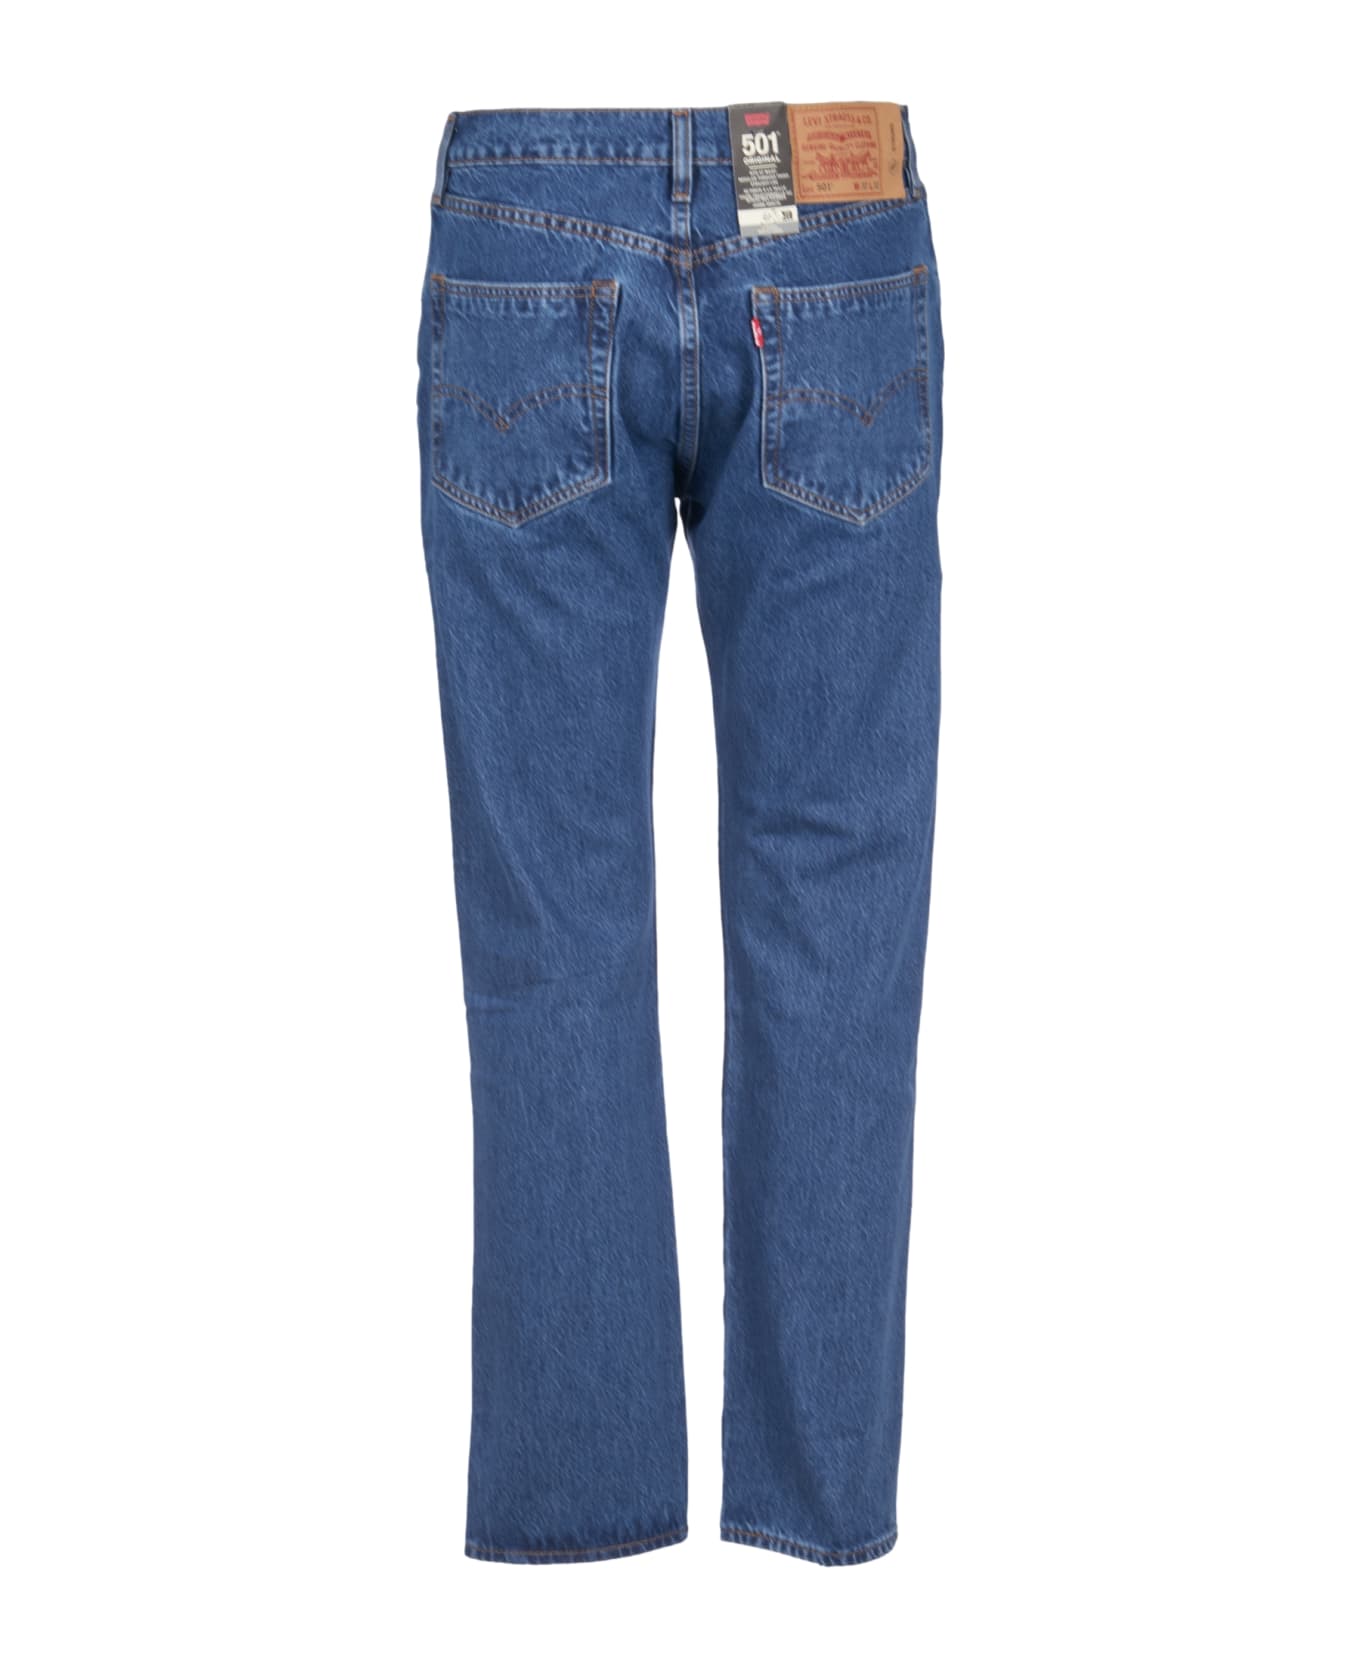 Levi's Buttoned Fitted Jeans - Mid Blue デニム